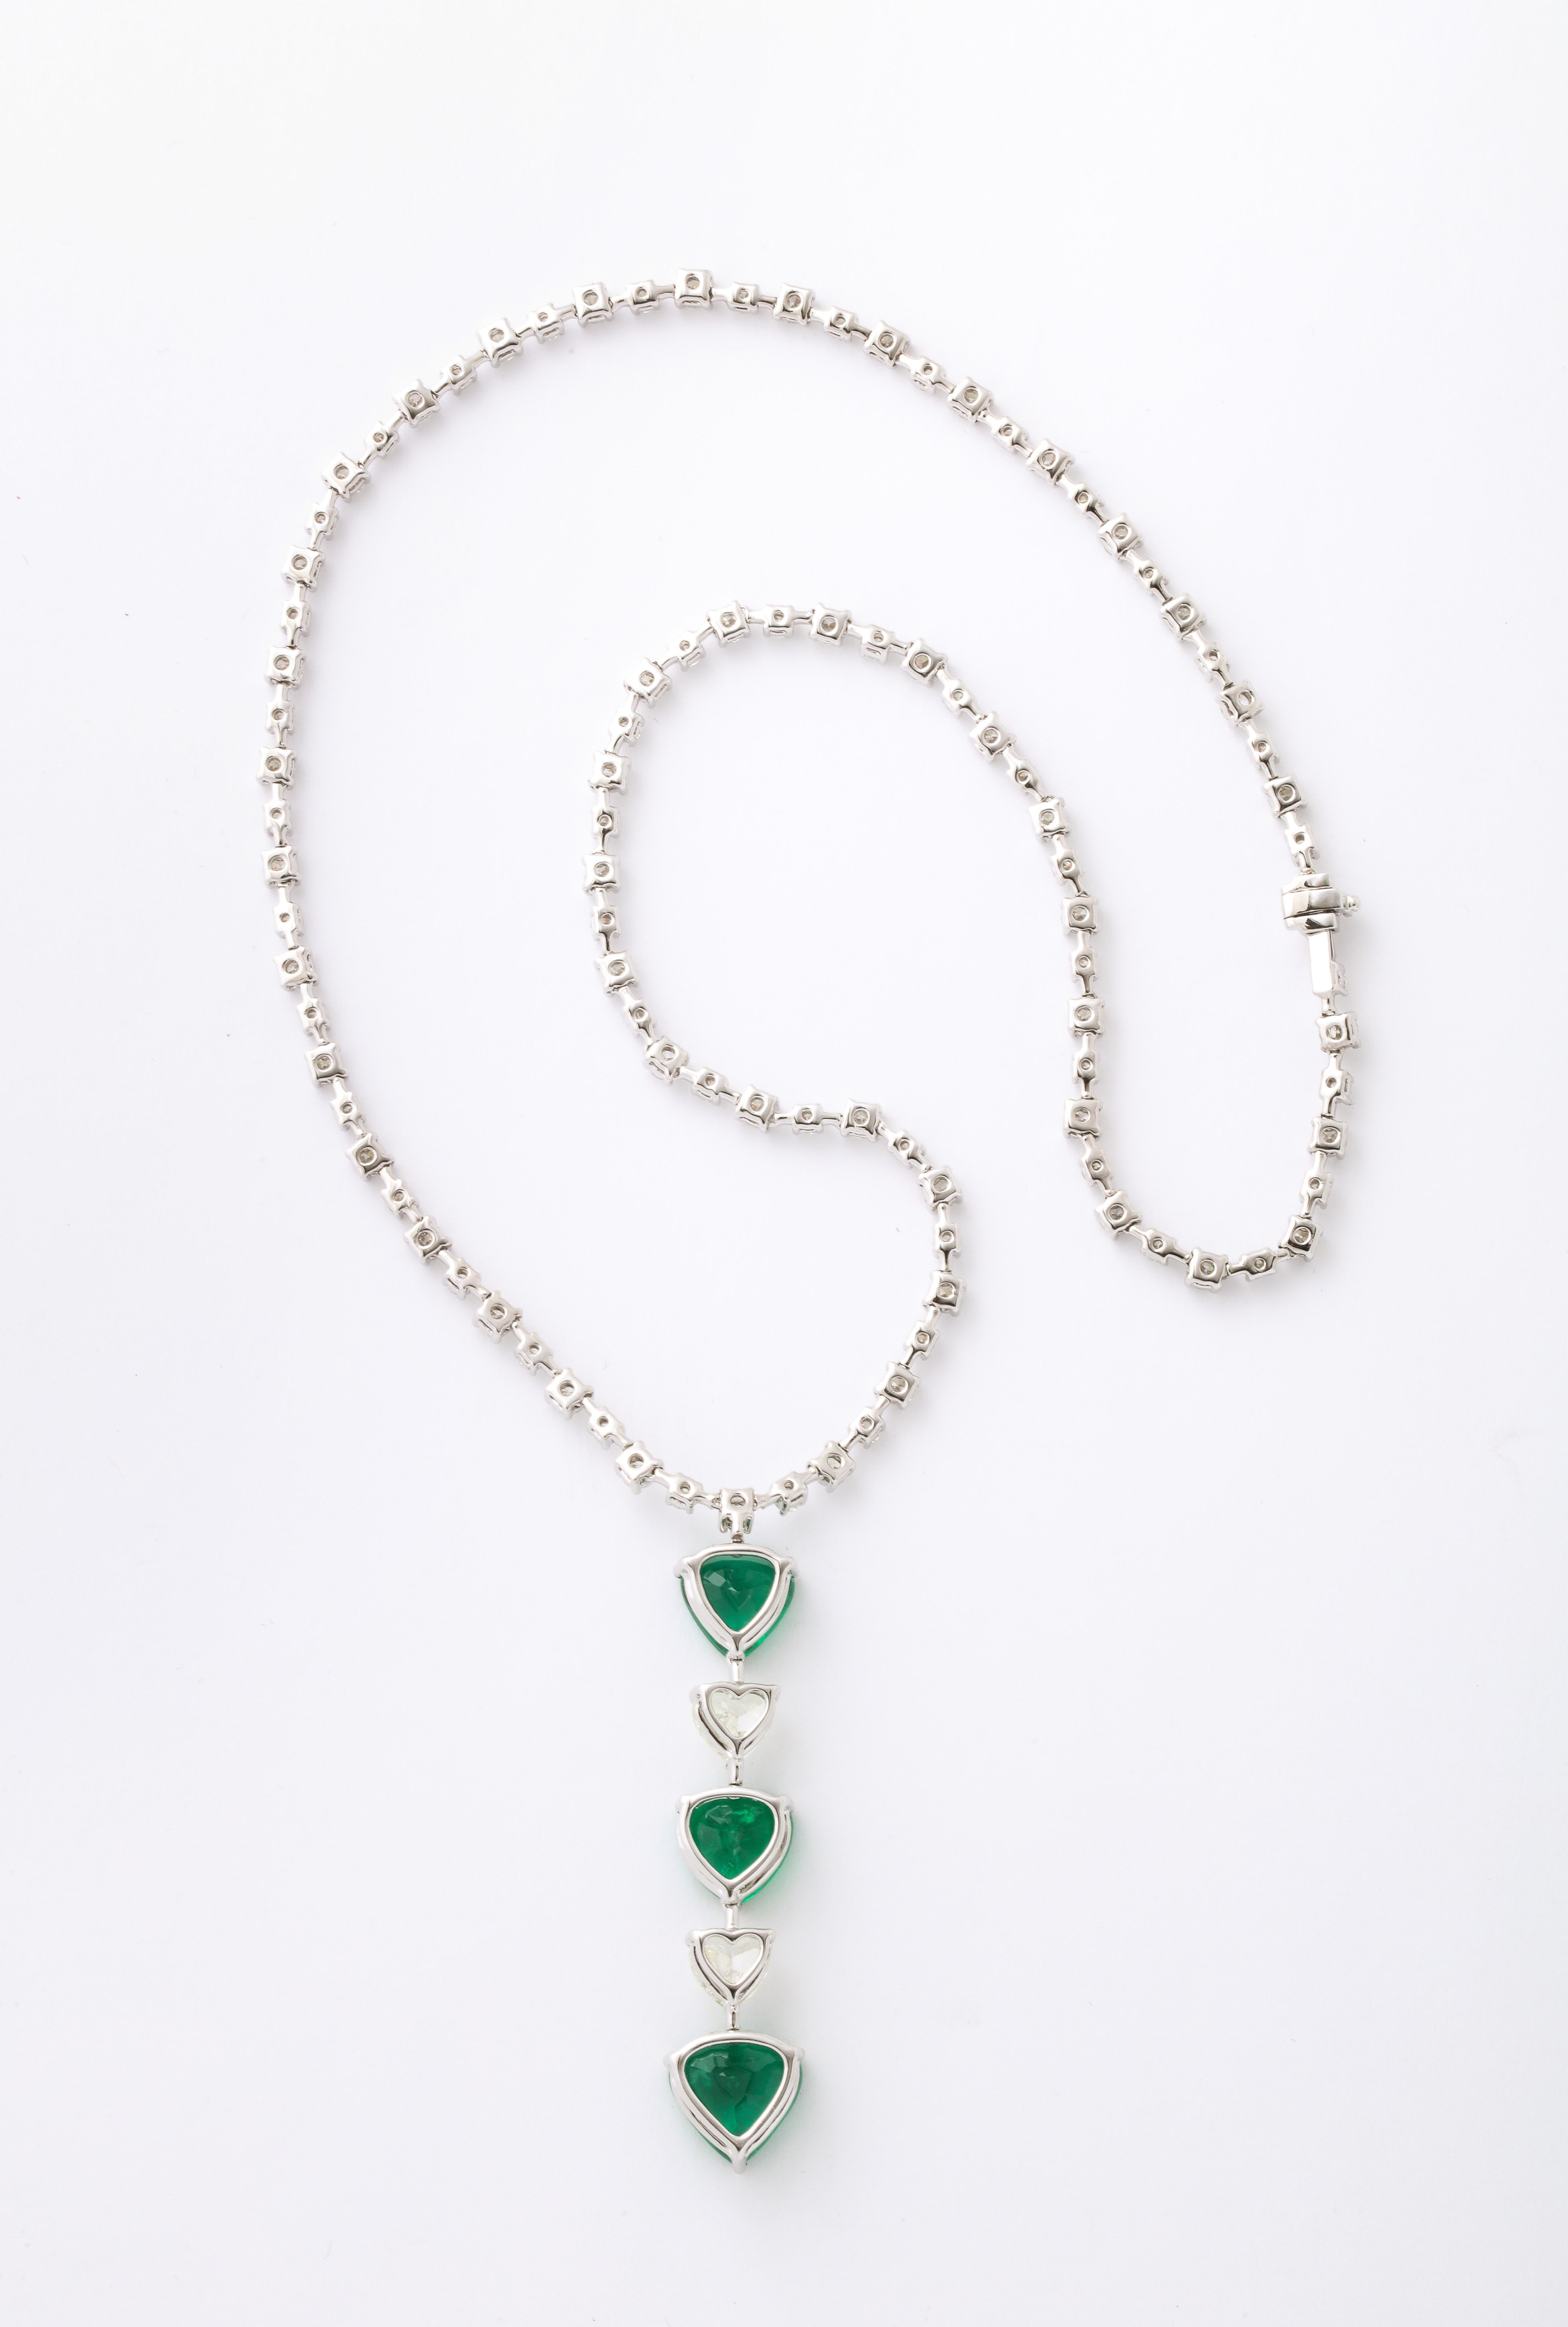 Heart Shape Emerald and Diamond Necklace For Sale 1